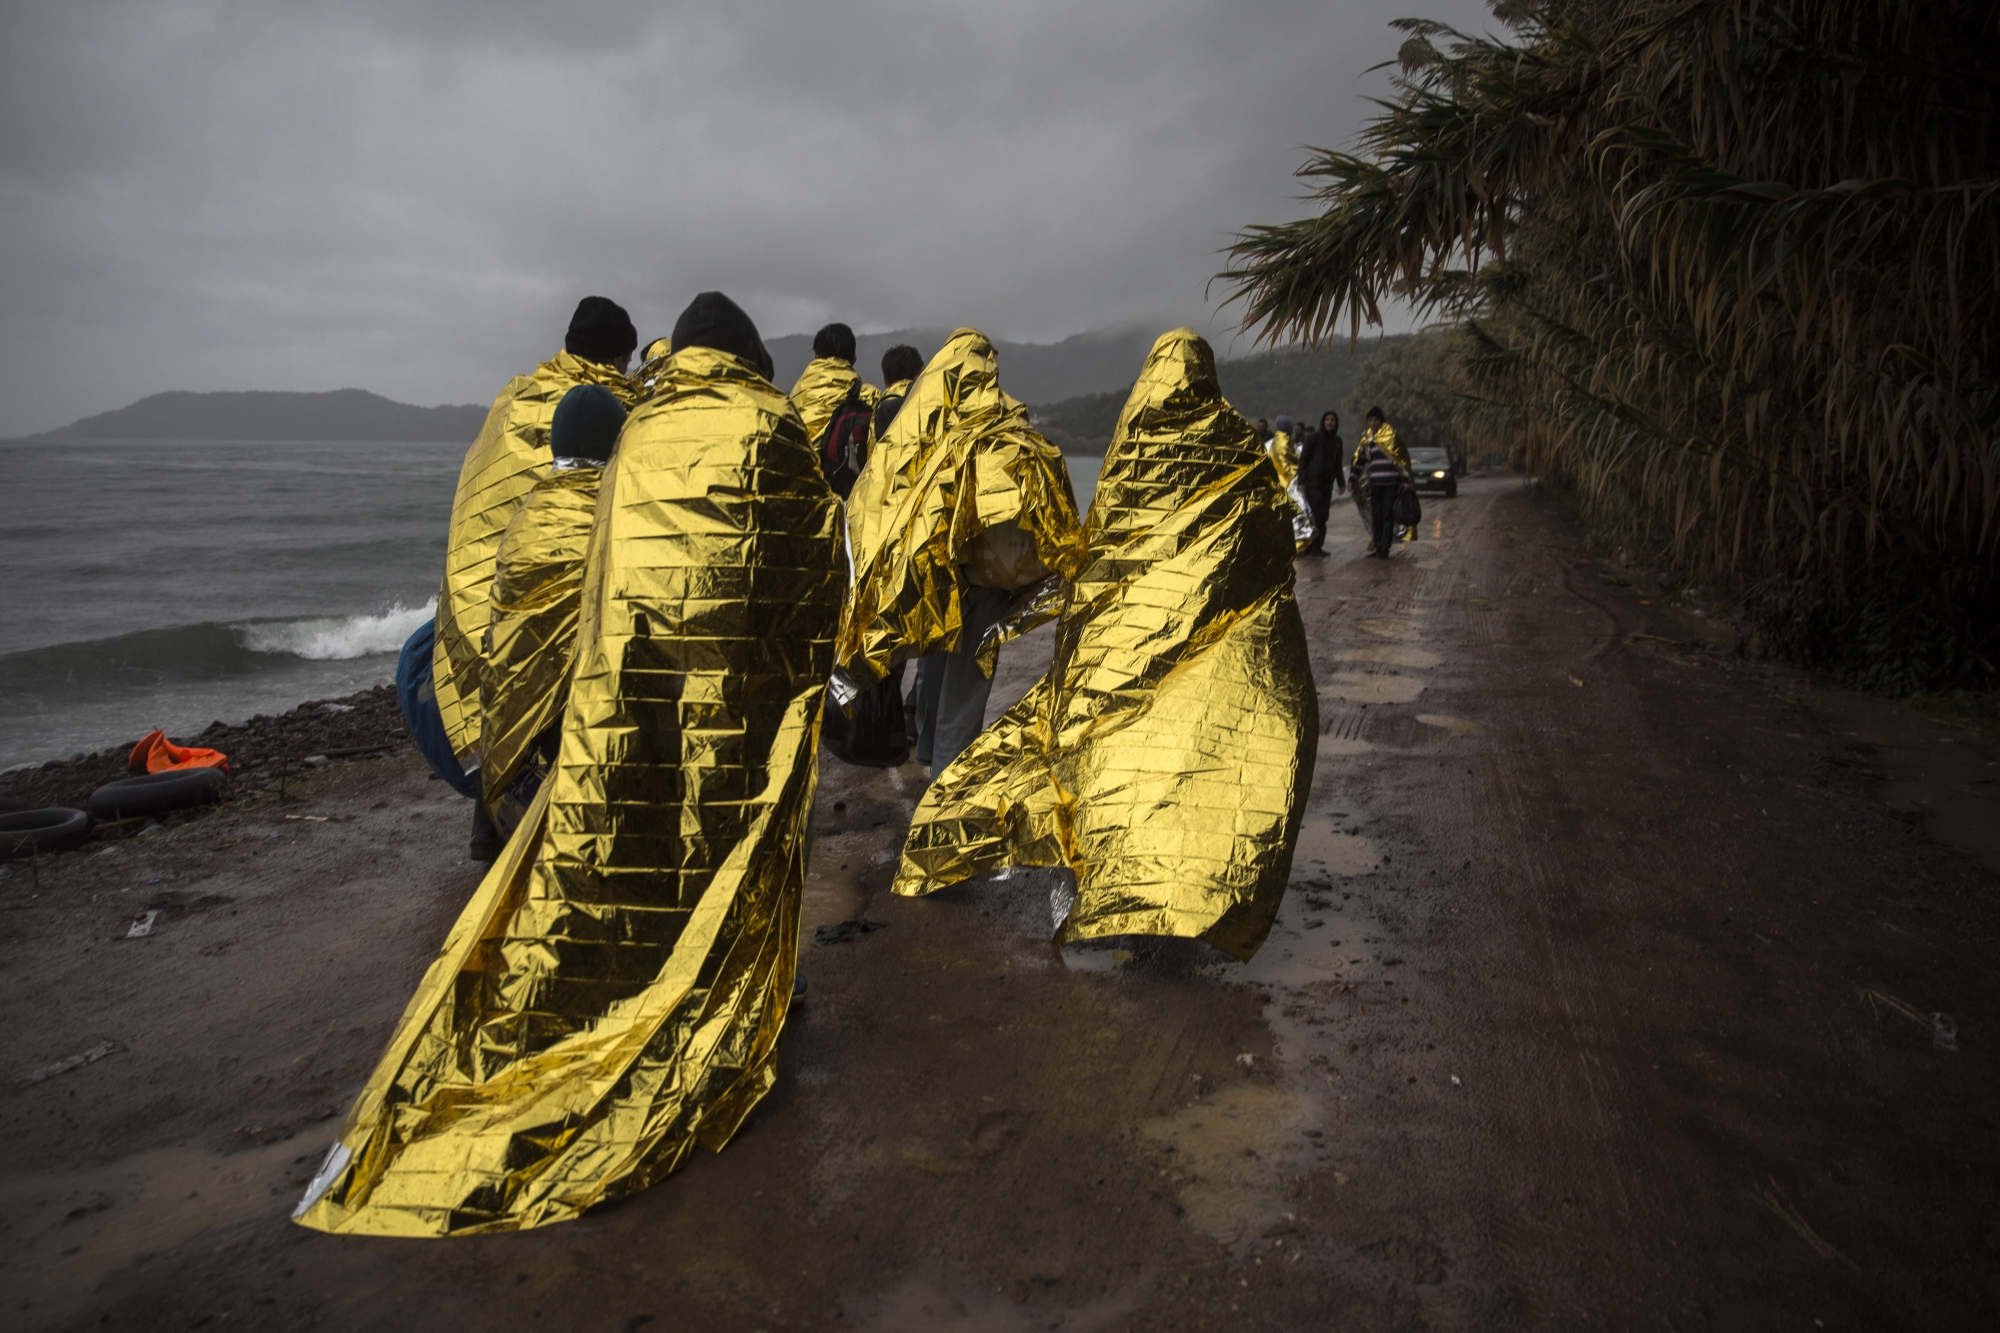 Refugees and migrants are covered with thermal blankets after their arrival on a dinghy from the Turkish coast to the Skala Sykaminias village on the northeastern Greek island of Lesbos, Friday, Oct. 23, 2015. The International Office for Migration says Greece over the last week experienced the largest single weekly influx of migrants and refugees this year, at an average of some 9,600 per day. (AP Photo/Santi Palacios)